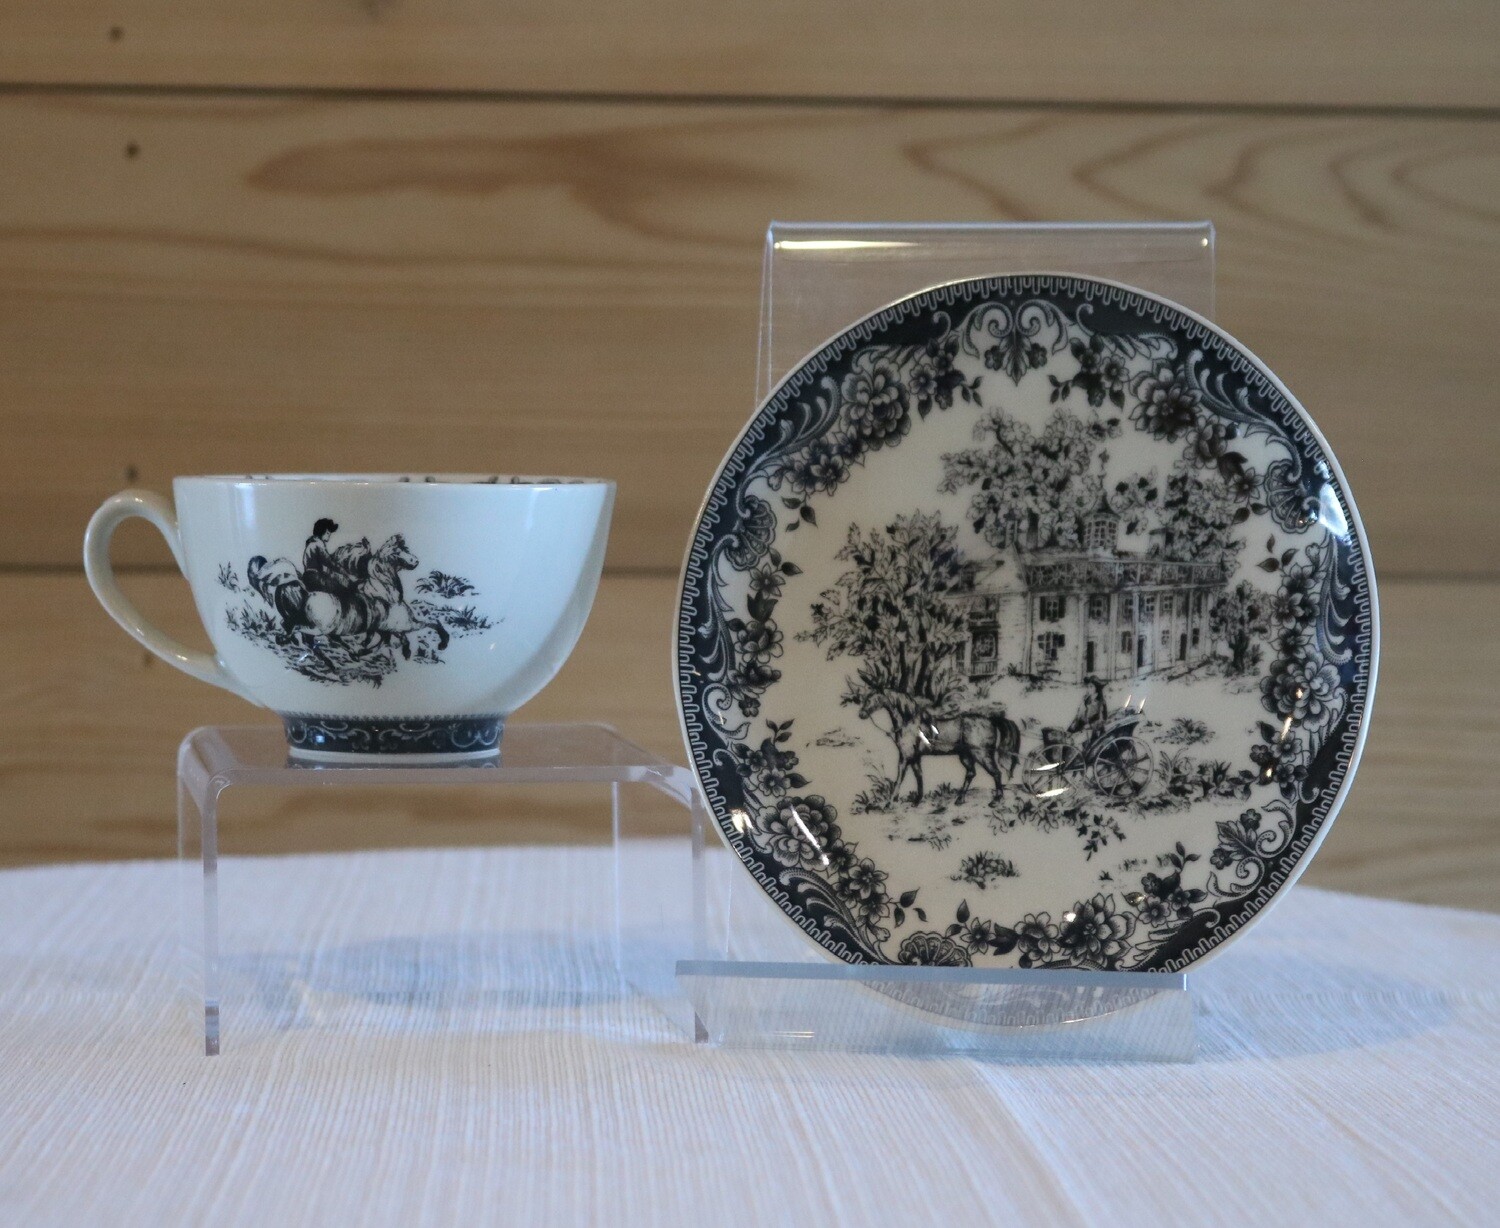 Equestrian Tea Cup and Saucer in Black Transferware